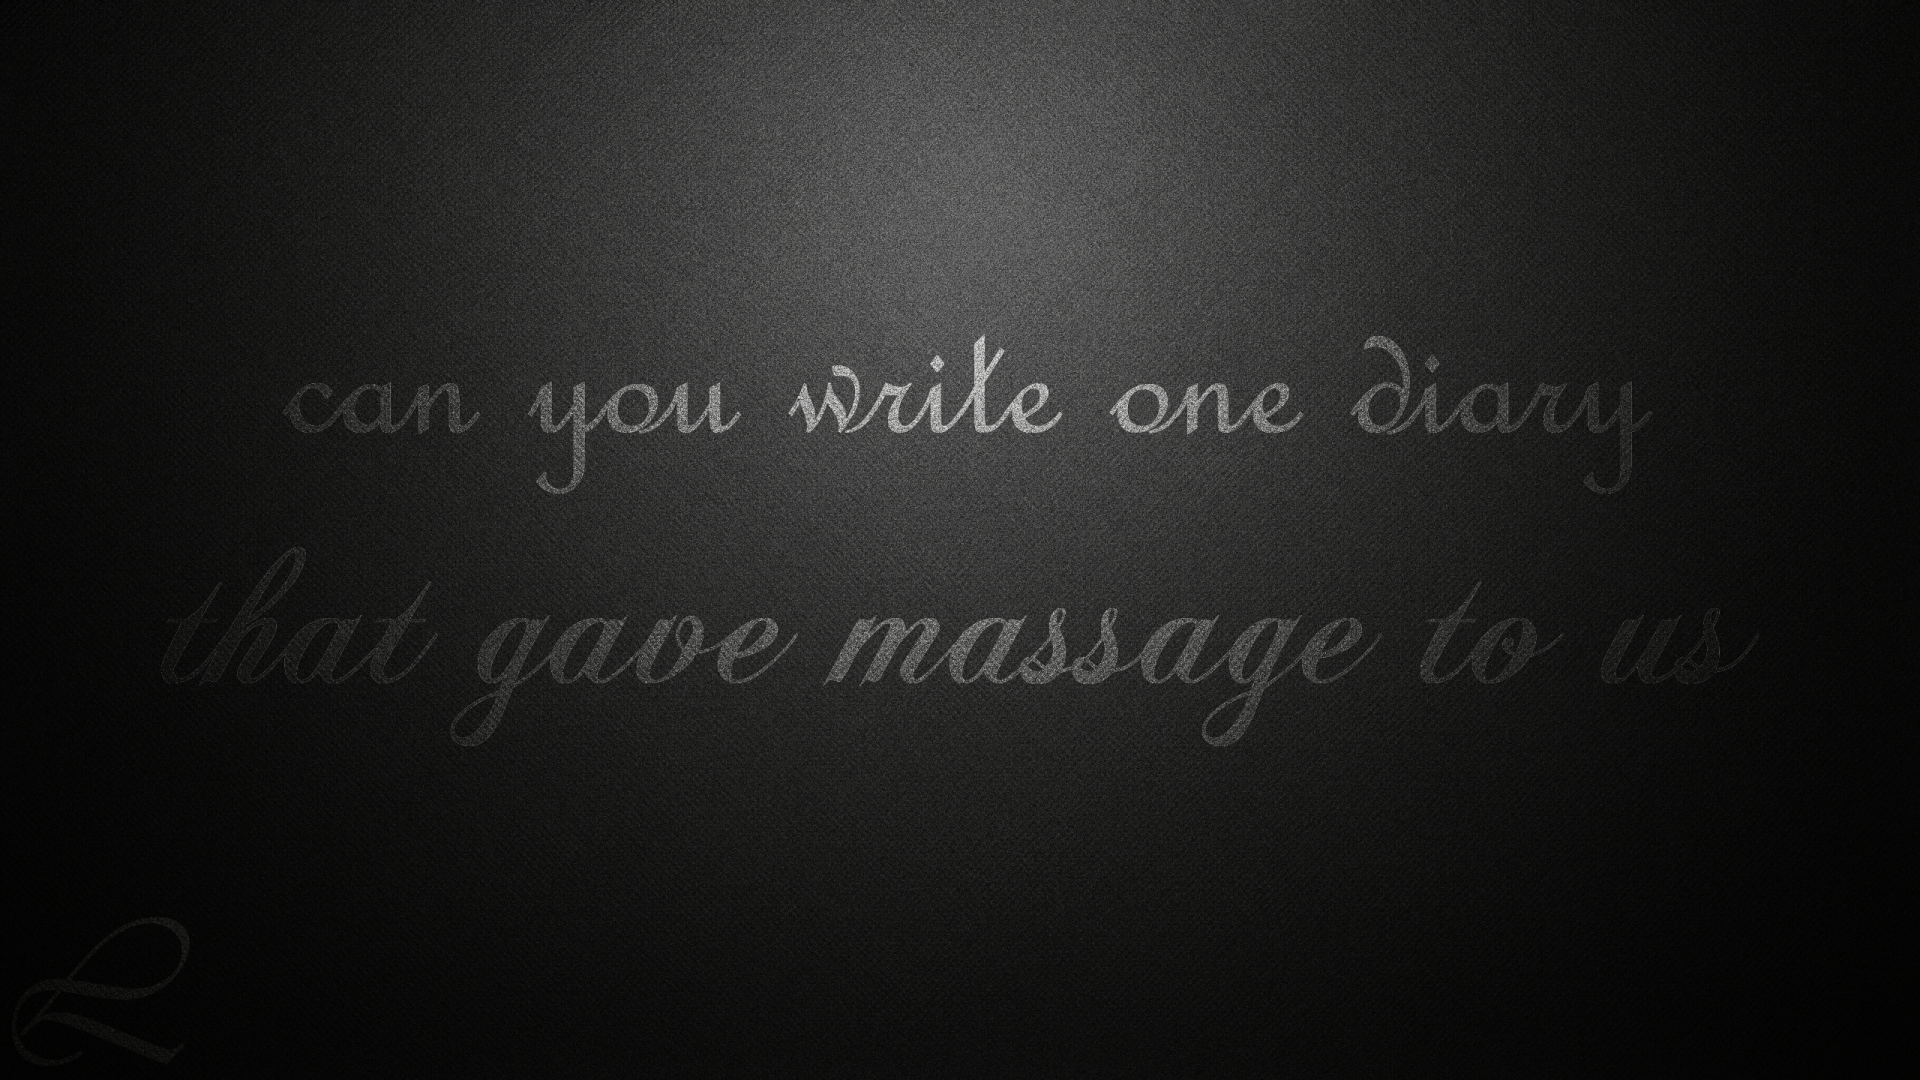 wallpapers that you can write on,text,black,font,darkness,blackboard